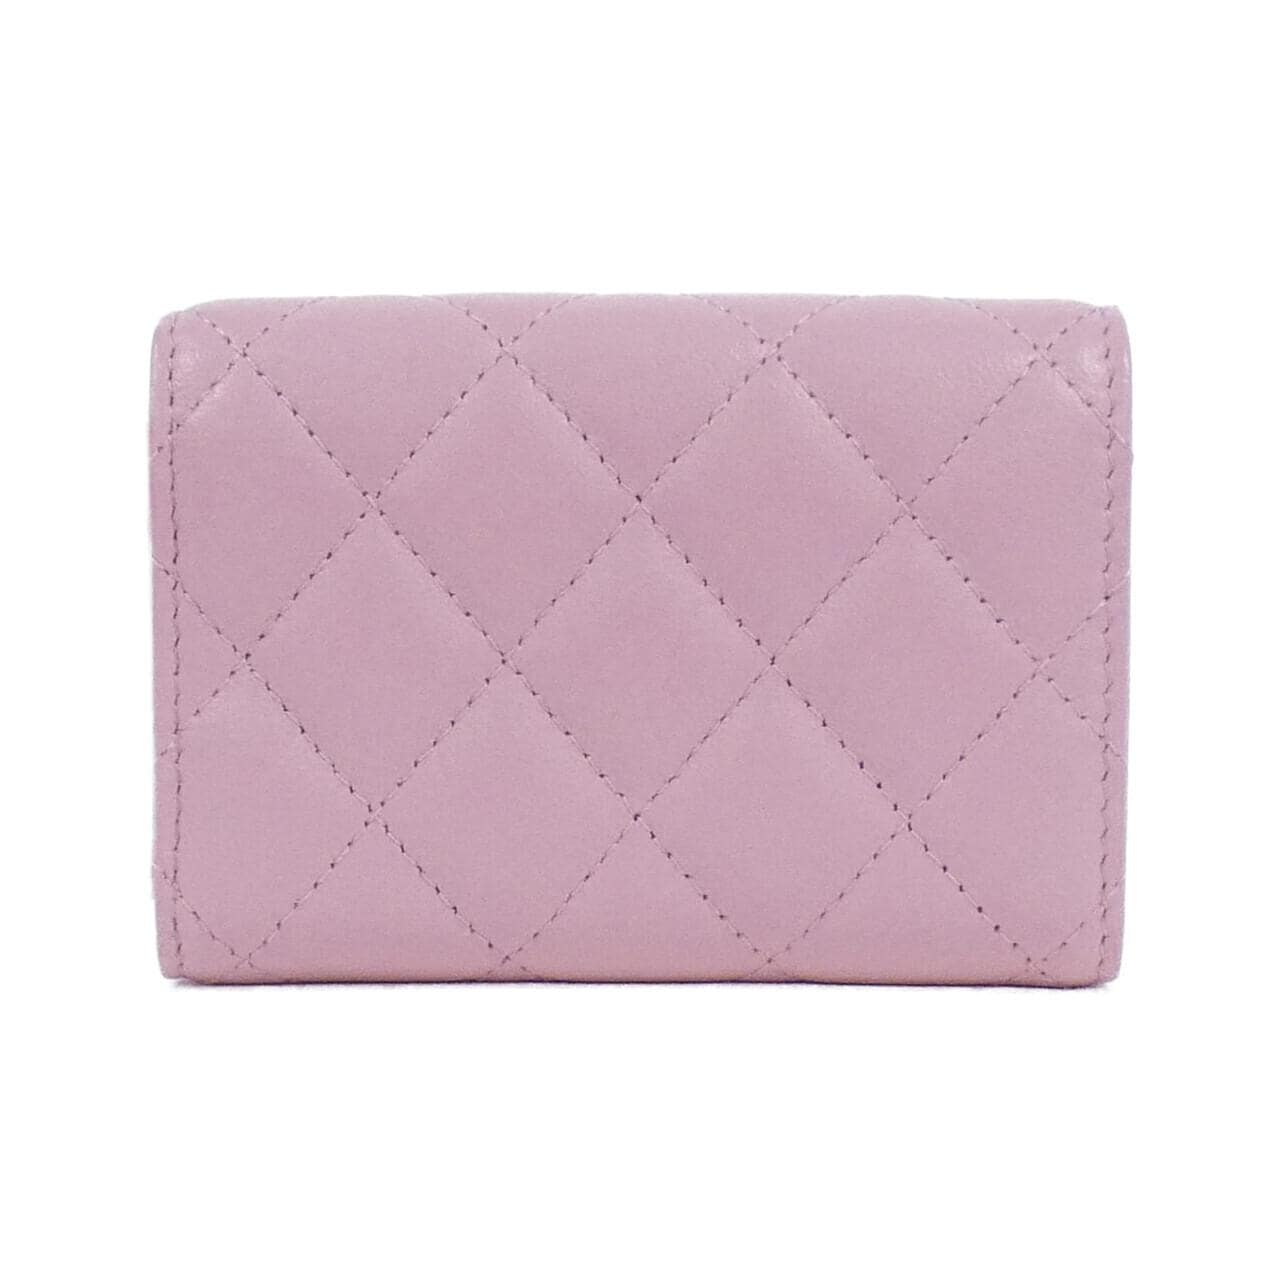 CHANEL Timeless Classic Line AP0230 Wallet